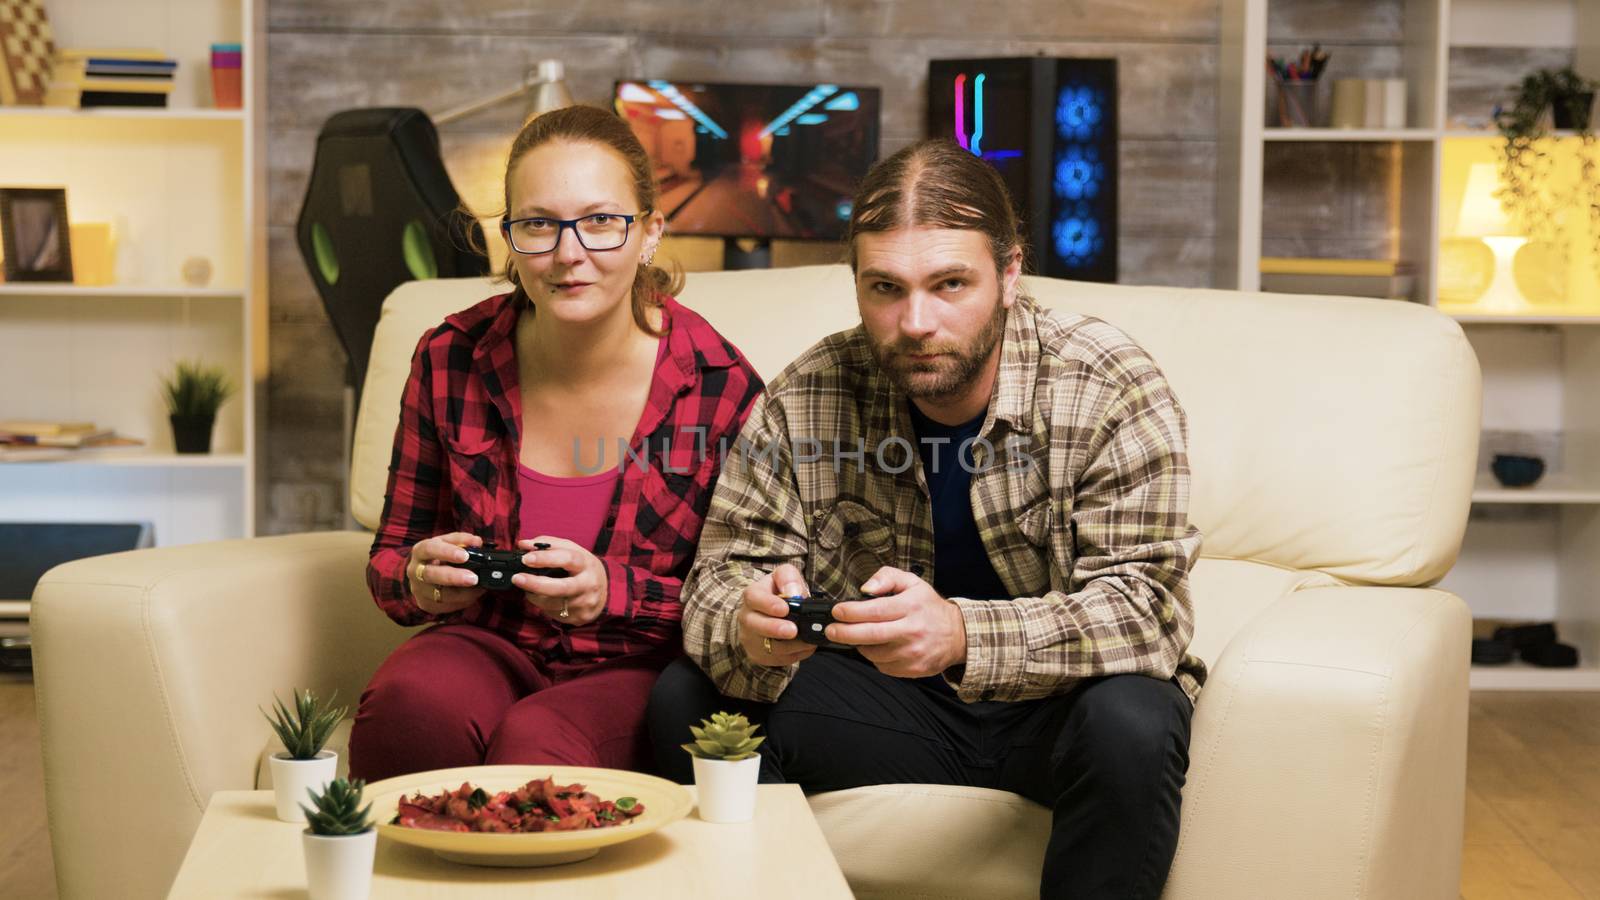 Zoom in shot of beautiful young couple playing video games sitting on couch using controllers.